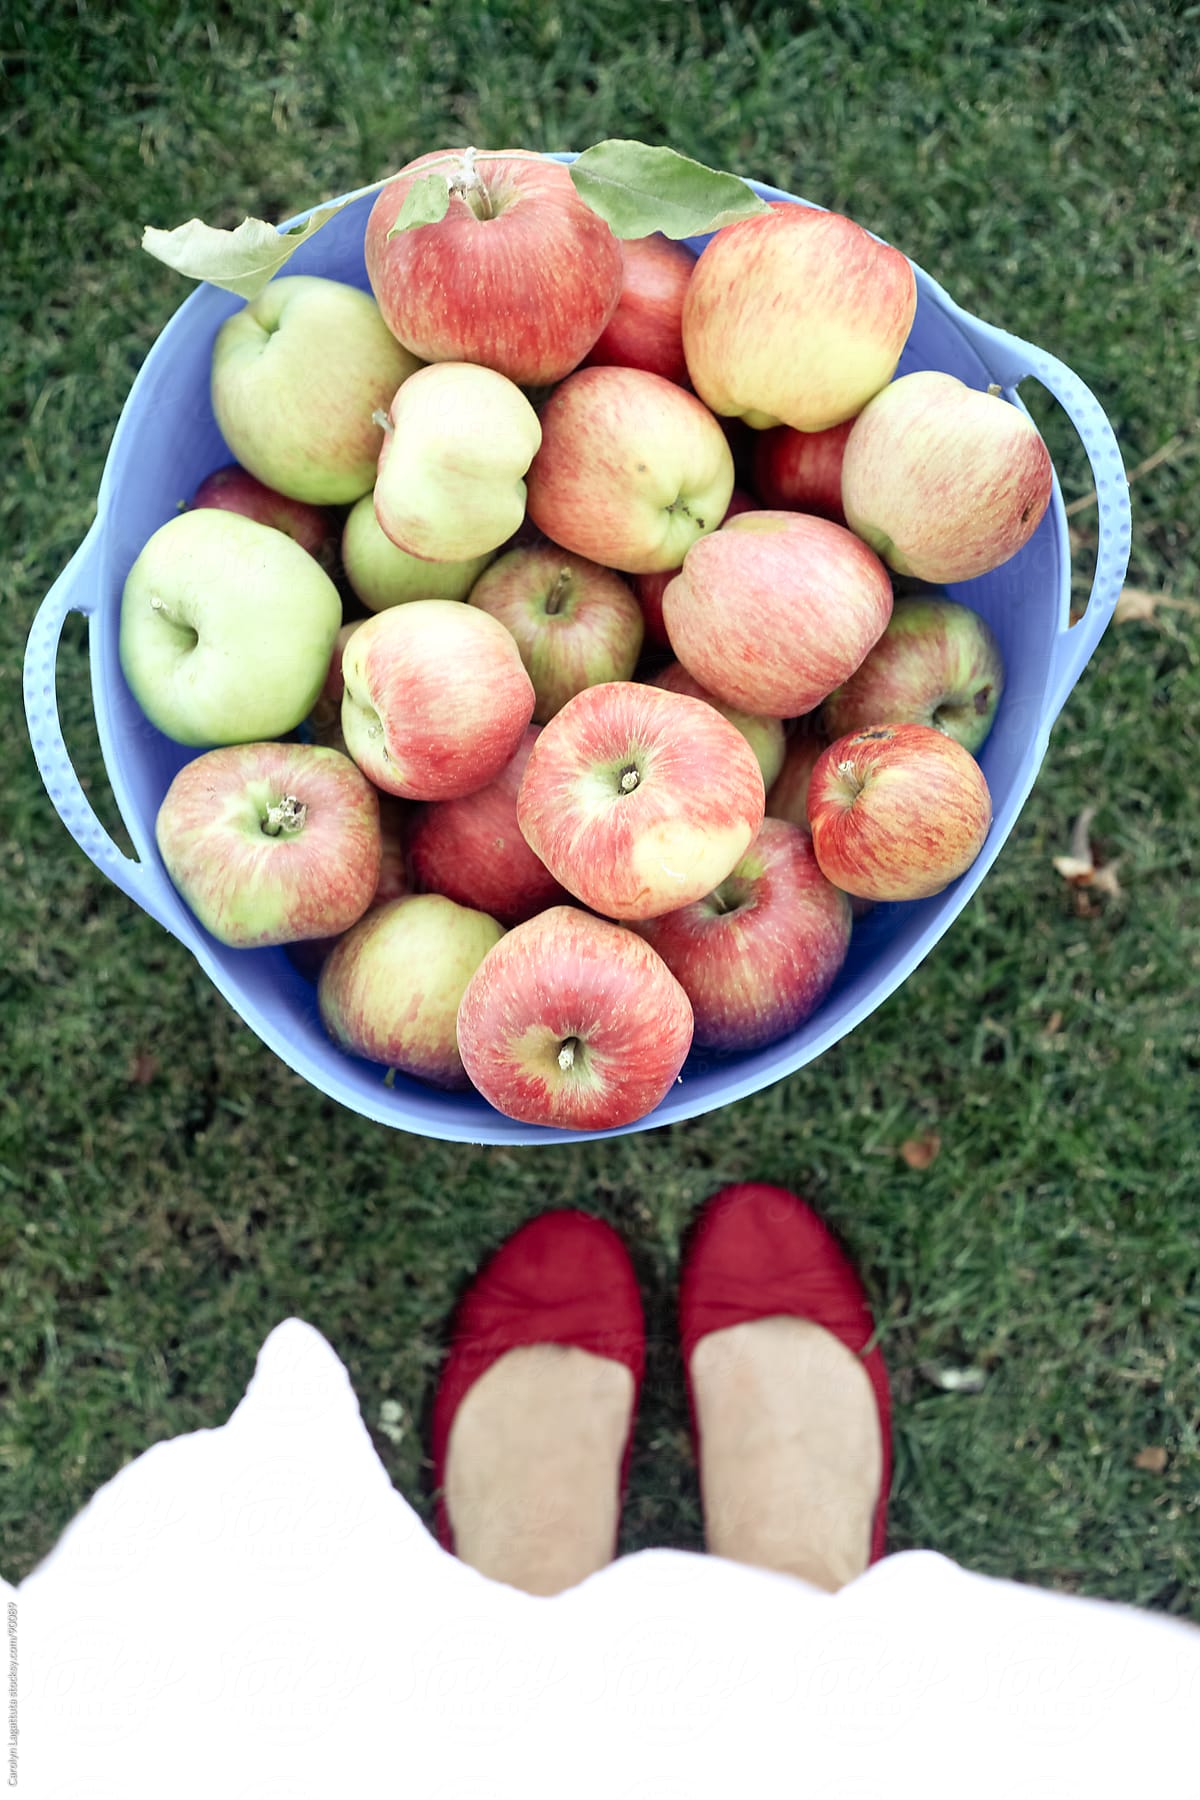 Girl in a white dress and red flats standing above her apple bounty